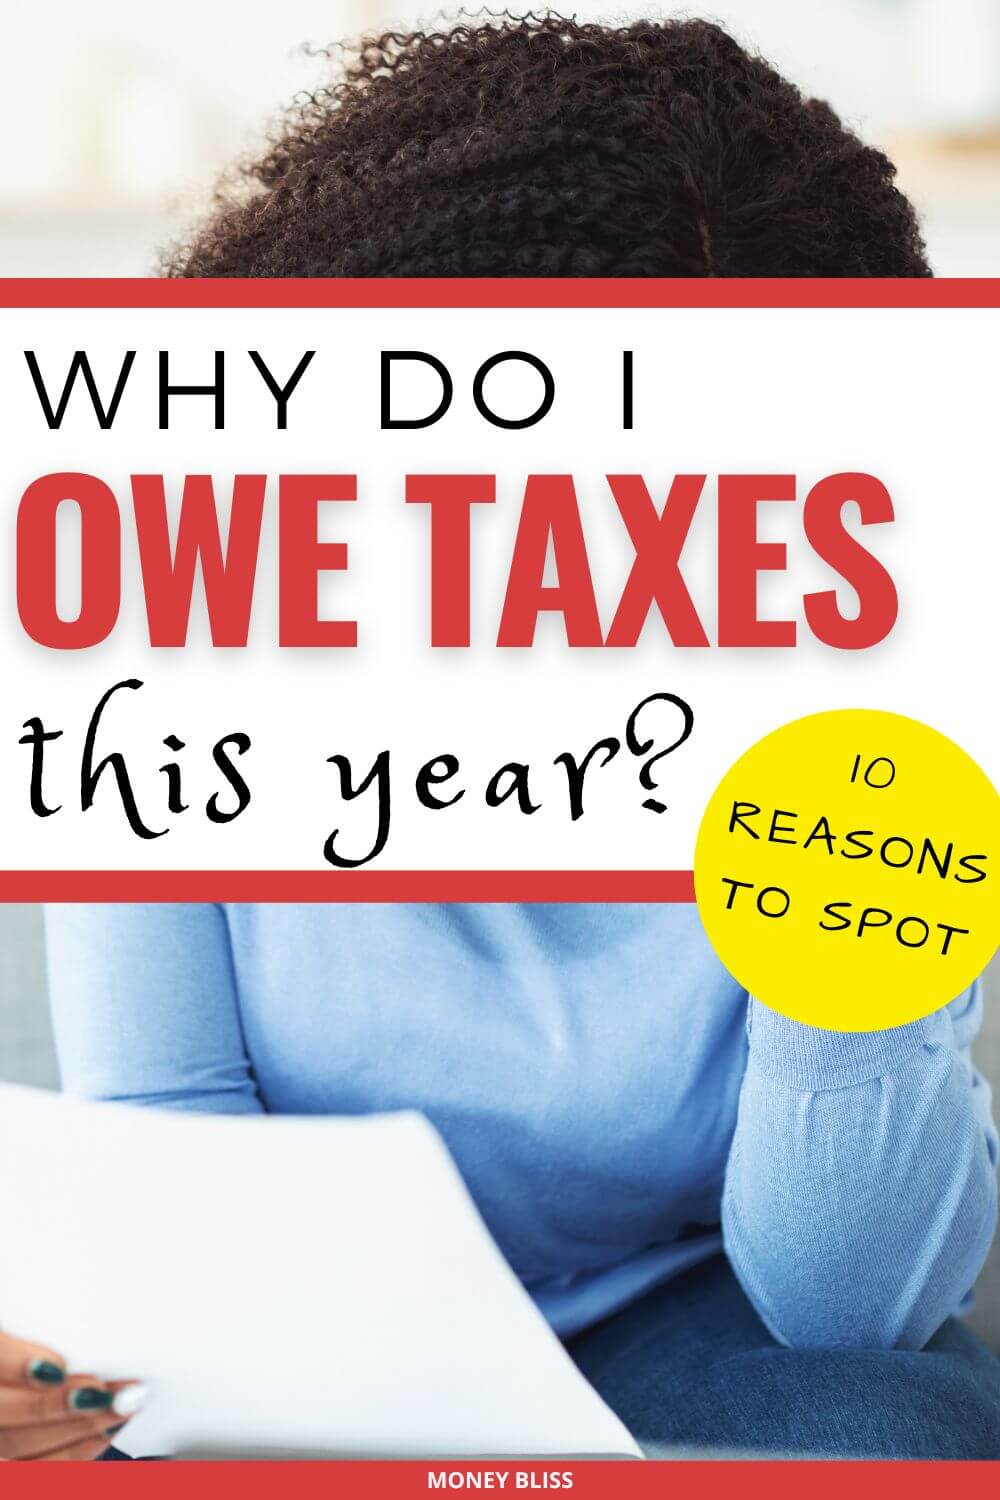 why-do-i-owe-taxes-this-year-10-reasons-to-spot-hanover-mortgages